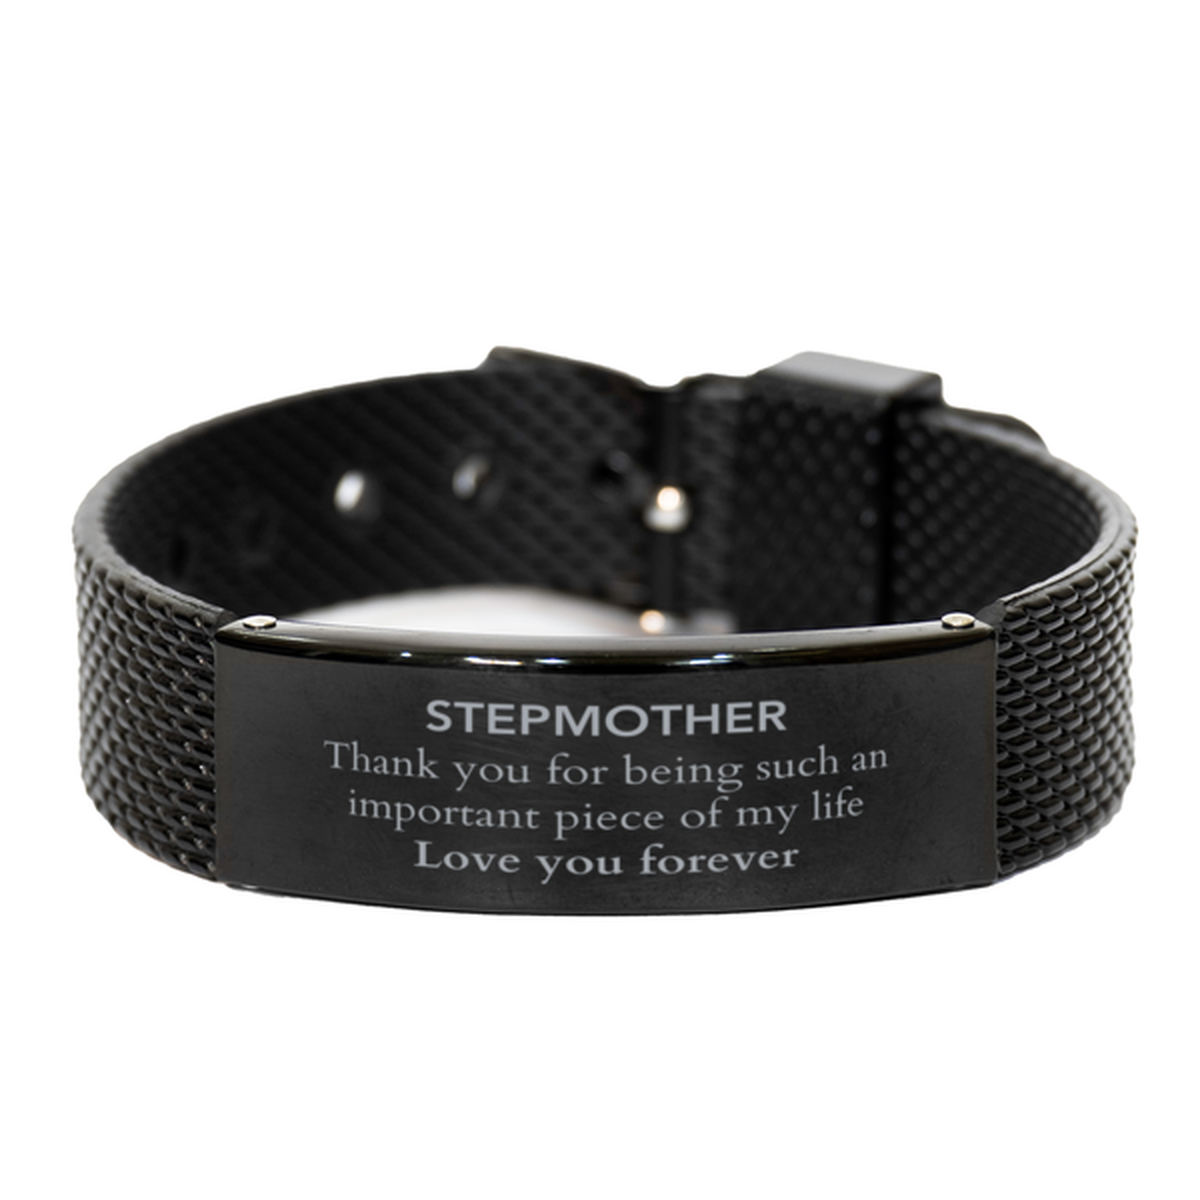 Appropriate Stepmother Black Shark Mesh Bracelet Epic Birthday Gifts for Stepmother Thank you for being such an important piece of my life Stepmother Christmas Mothers Fathers Day